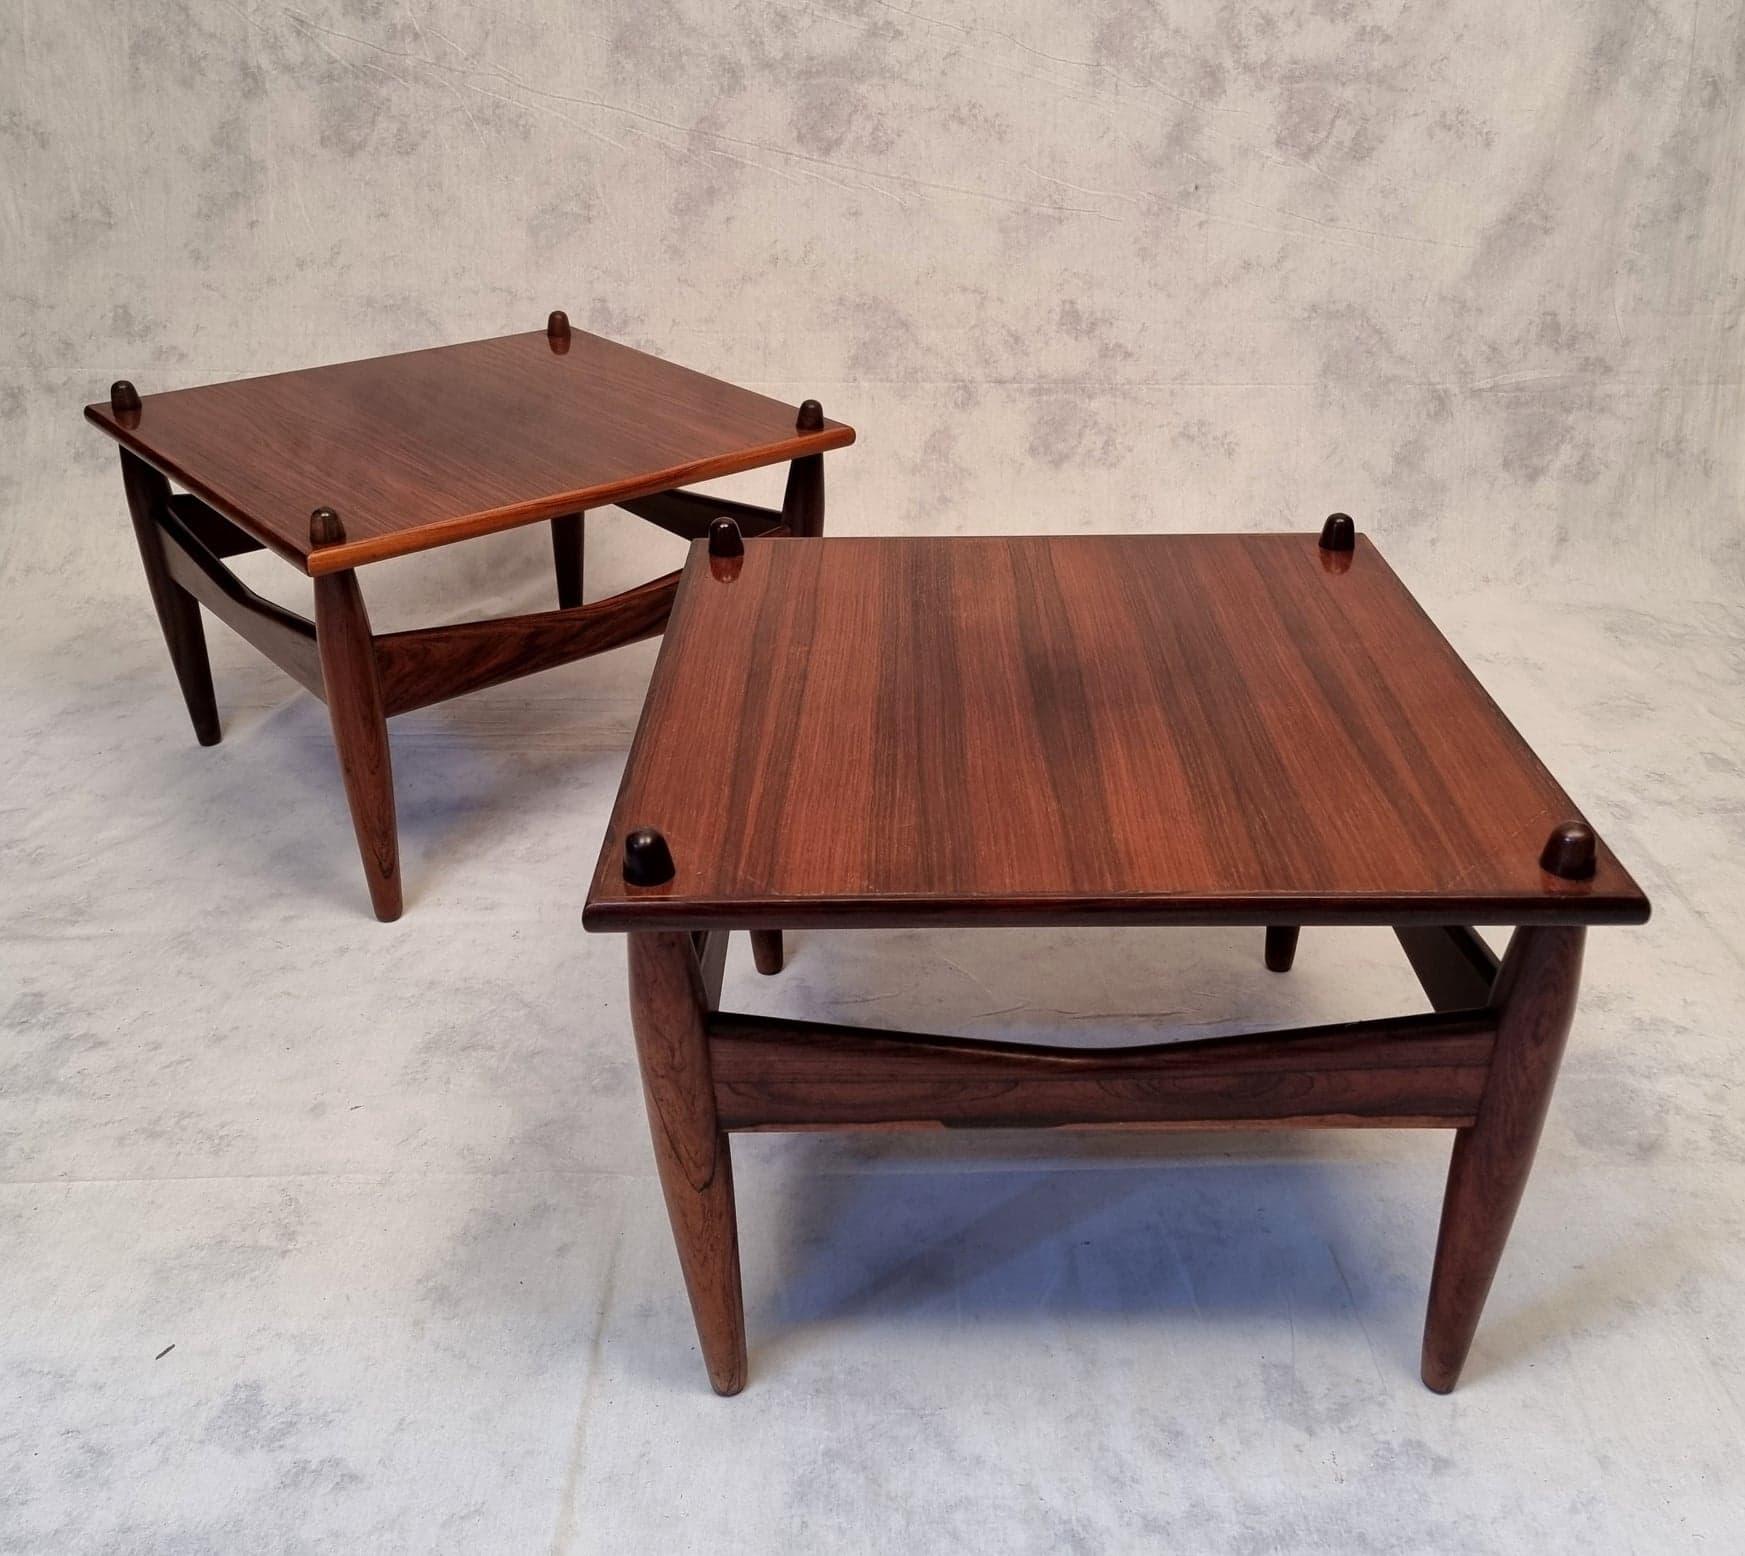 Pair Of Side Tables By Illum Wikkelsø – N°272, Rosewood, Ca 1950 For Sale 2